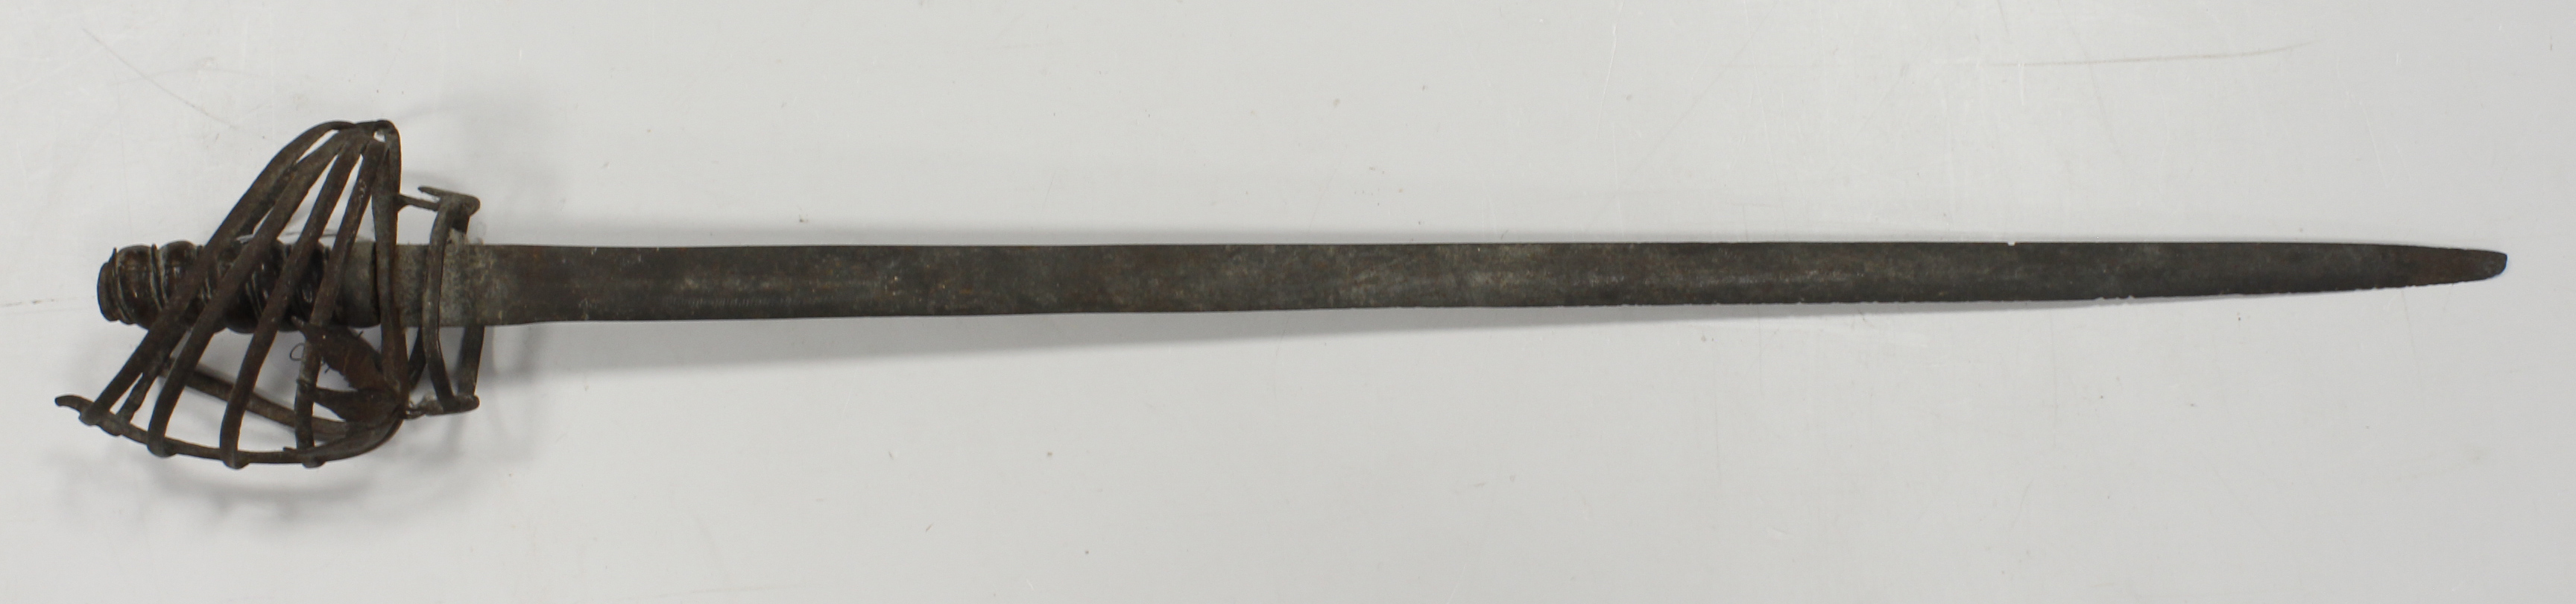 Near relic basket hilted sword, most likely Scottish, four bars to left and one to the right, latter